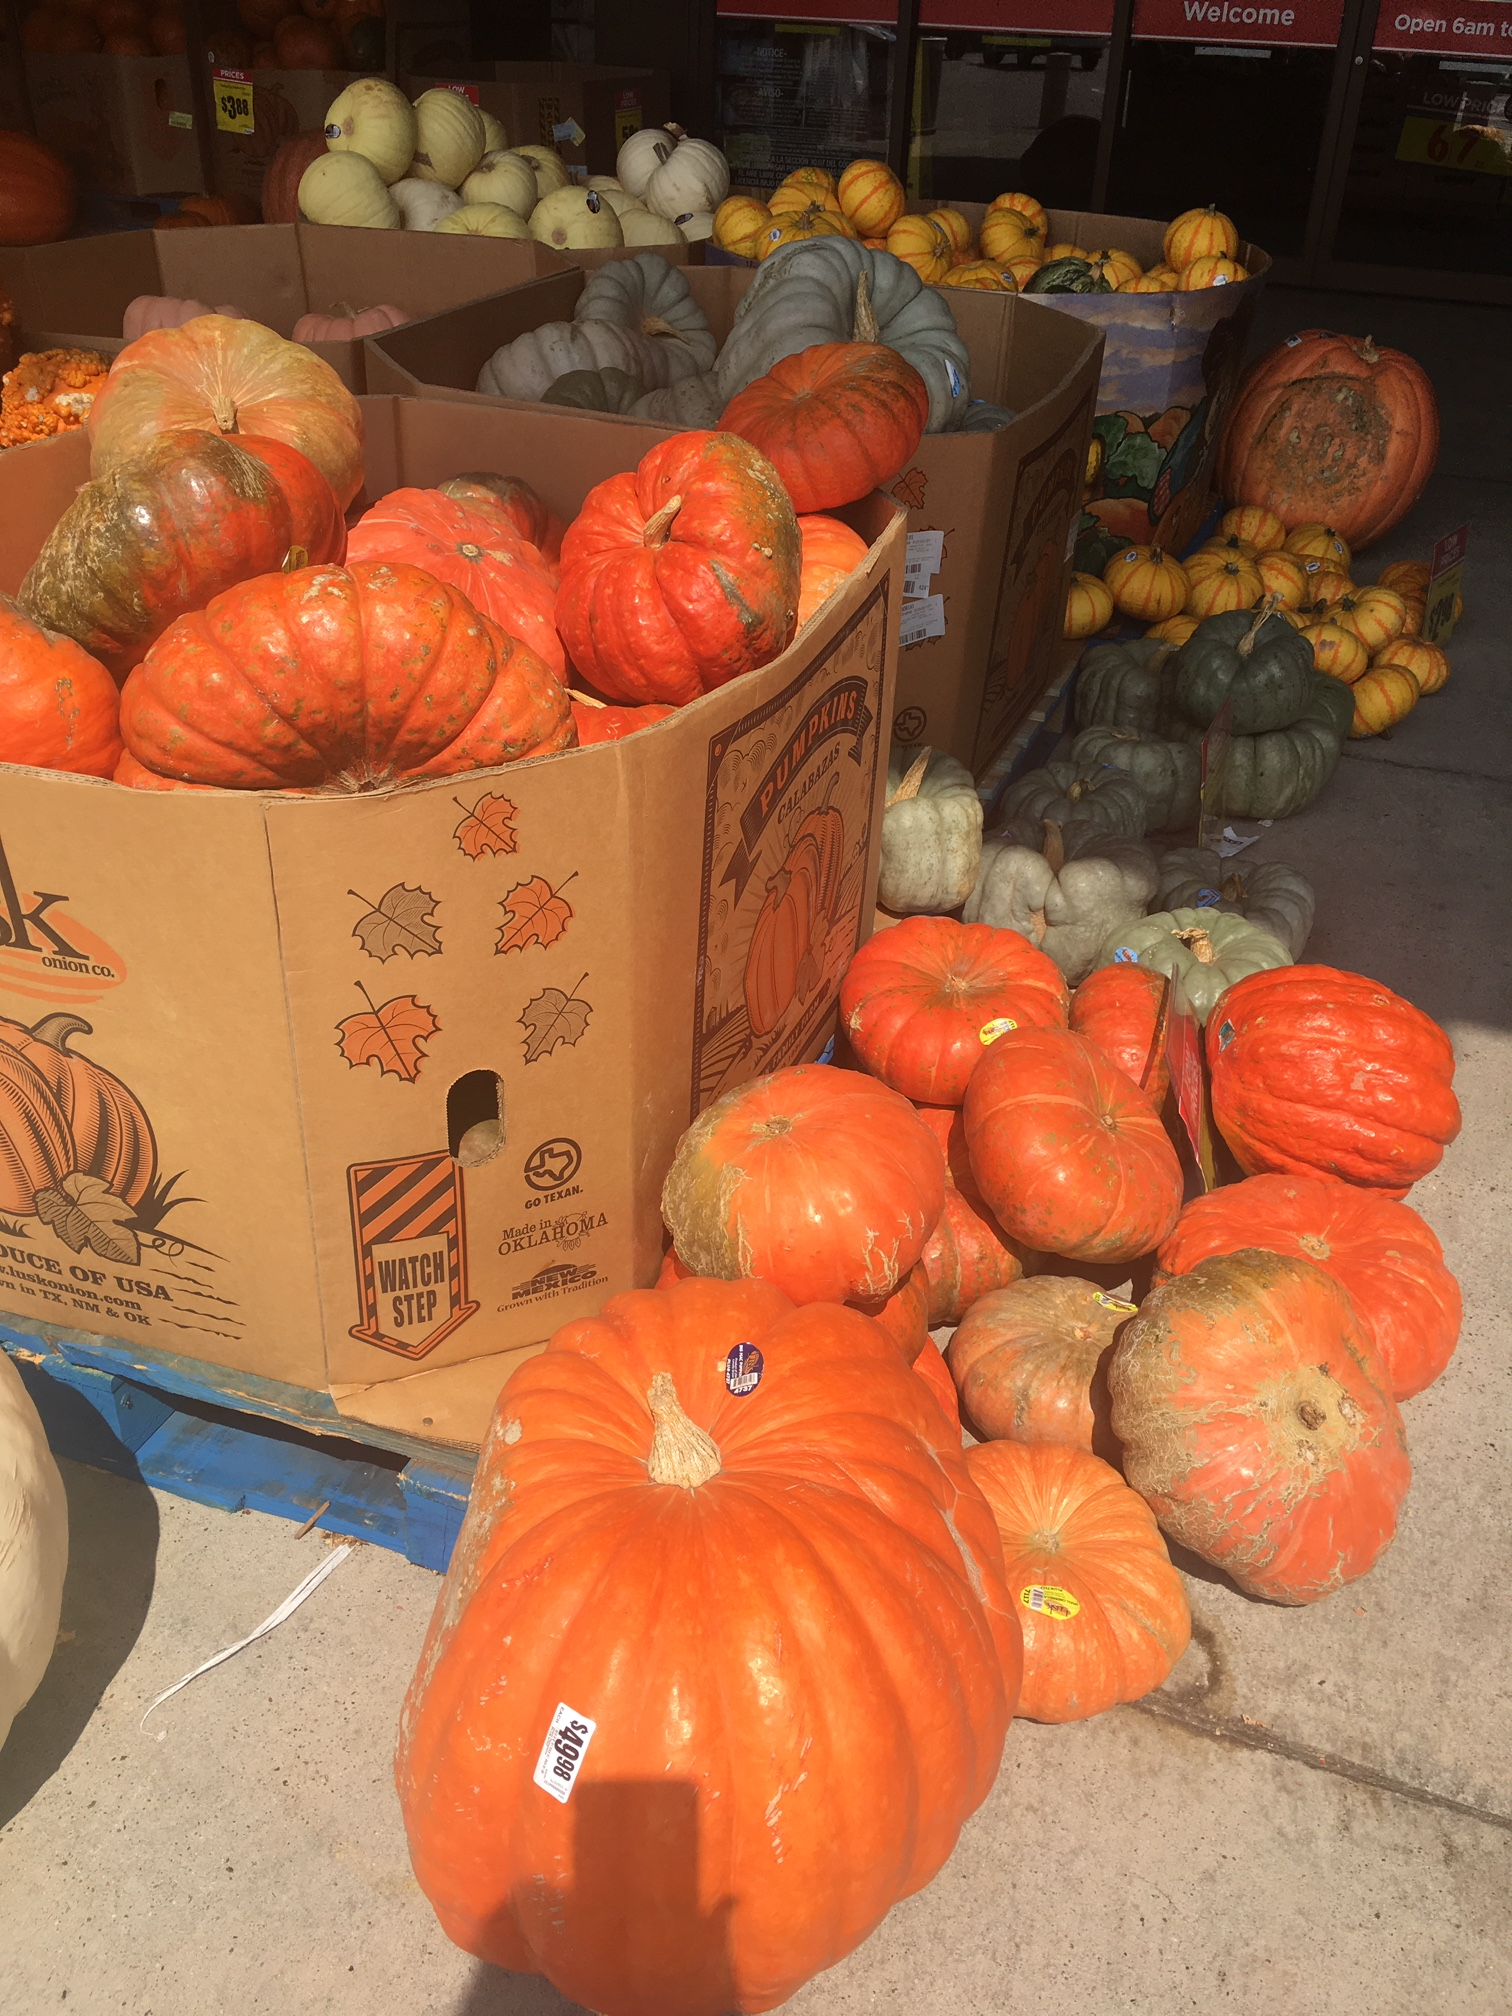 Just a few of the pumpkins at stores near us